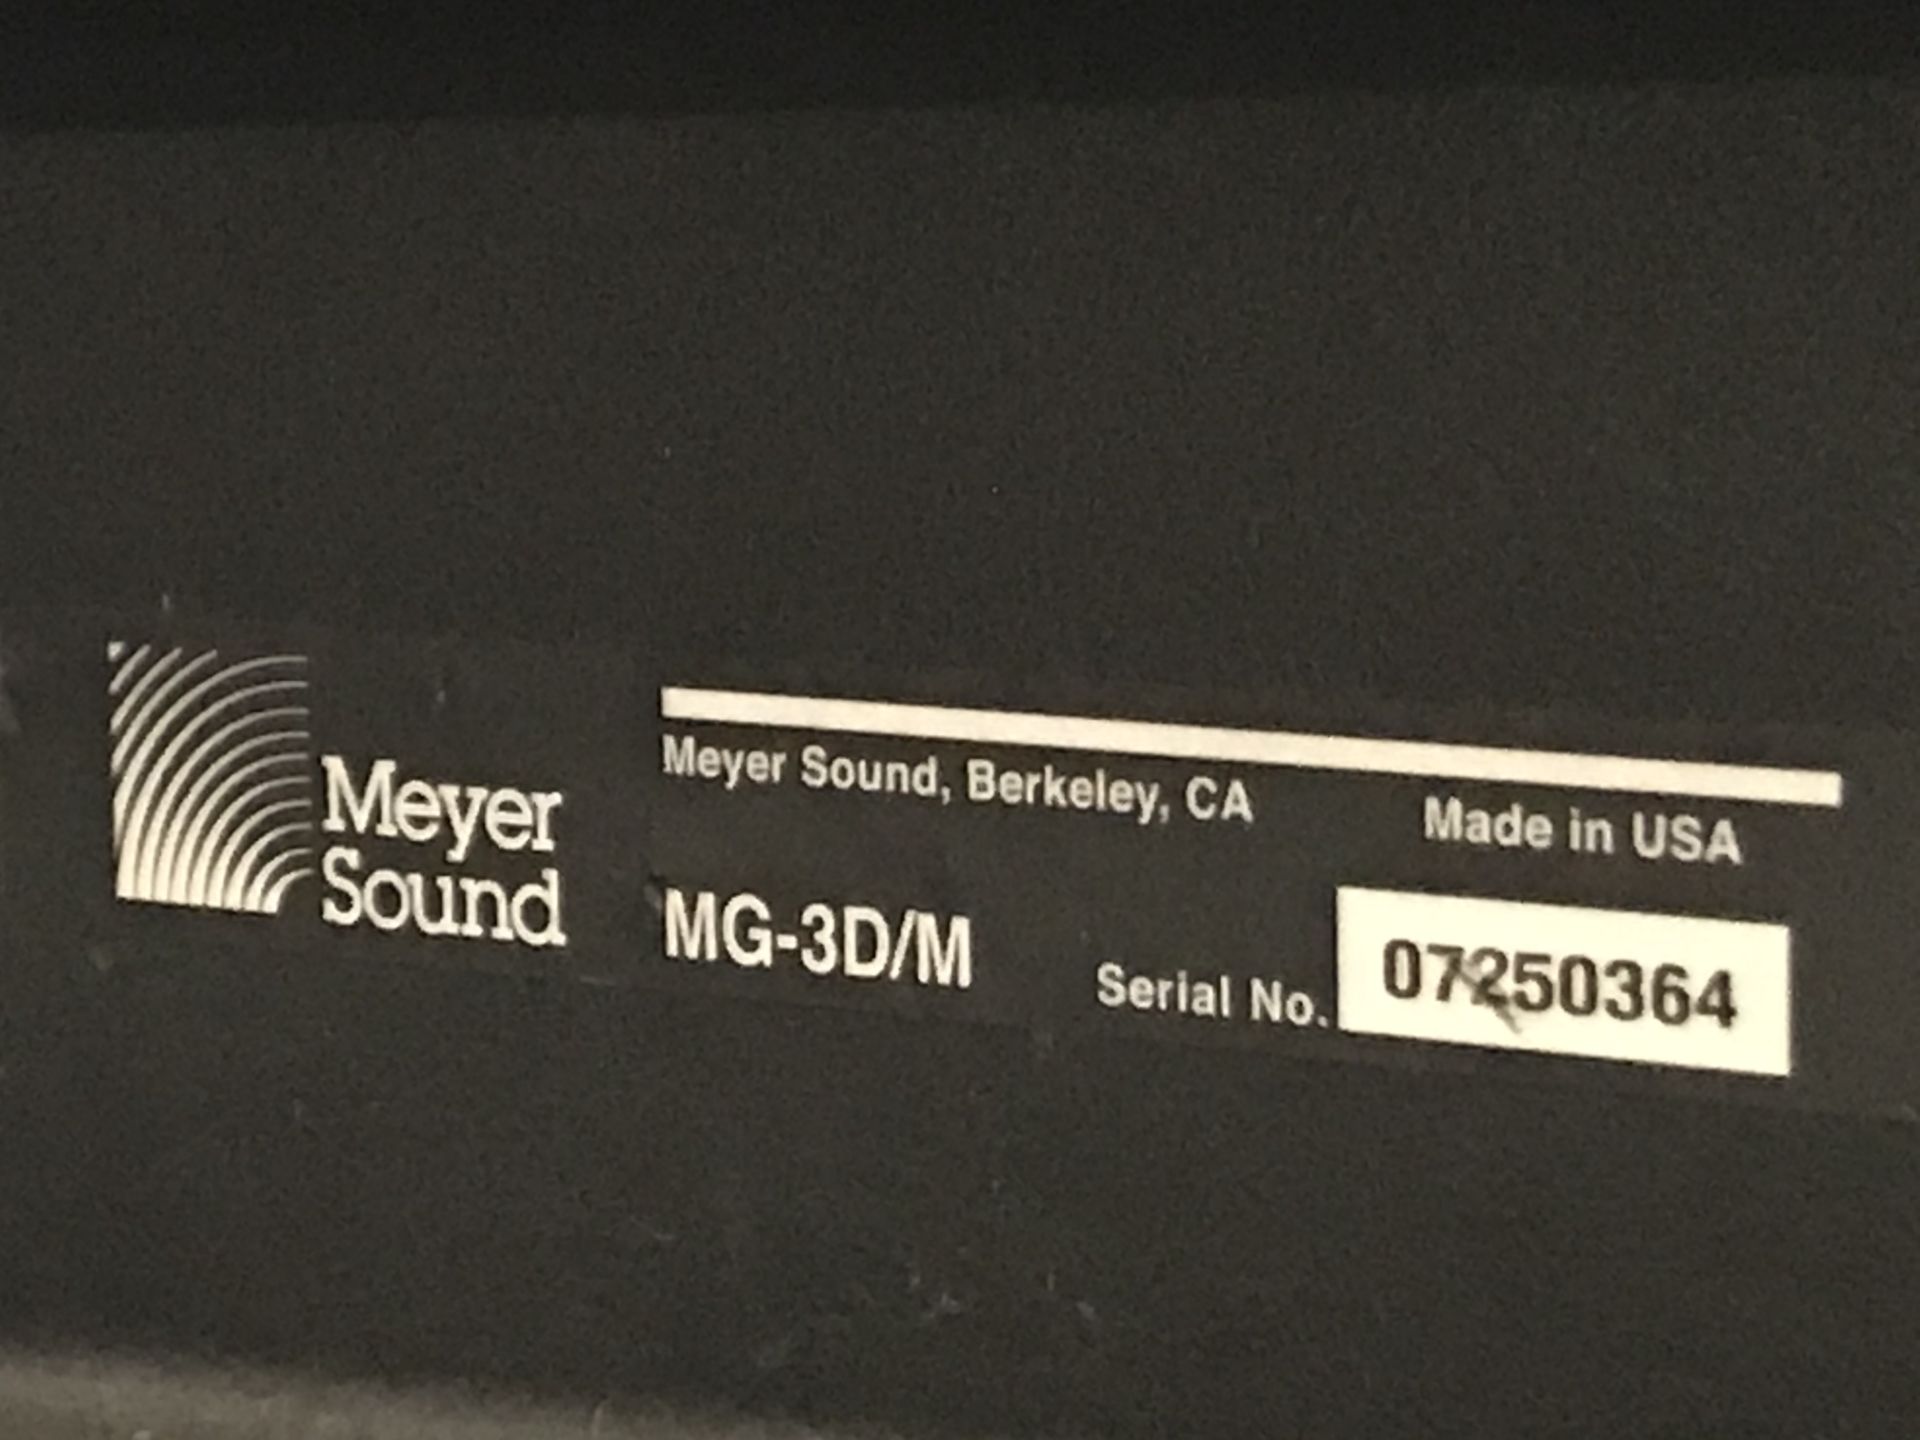 LOT OF: (4) MEYER SOUND, MILO HP MONITORS W/ ROLLING CART AND (1) 43" X 54" STEEL FRAME GROUNDSTACK - Image 11 of 12